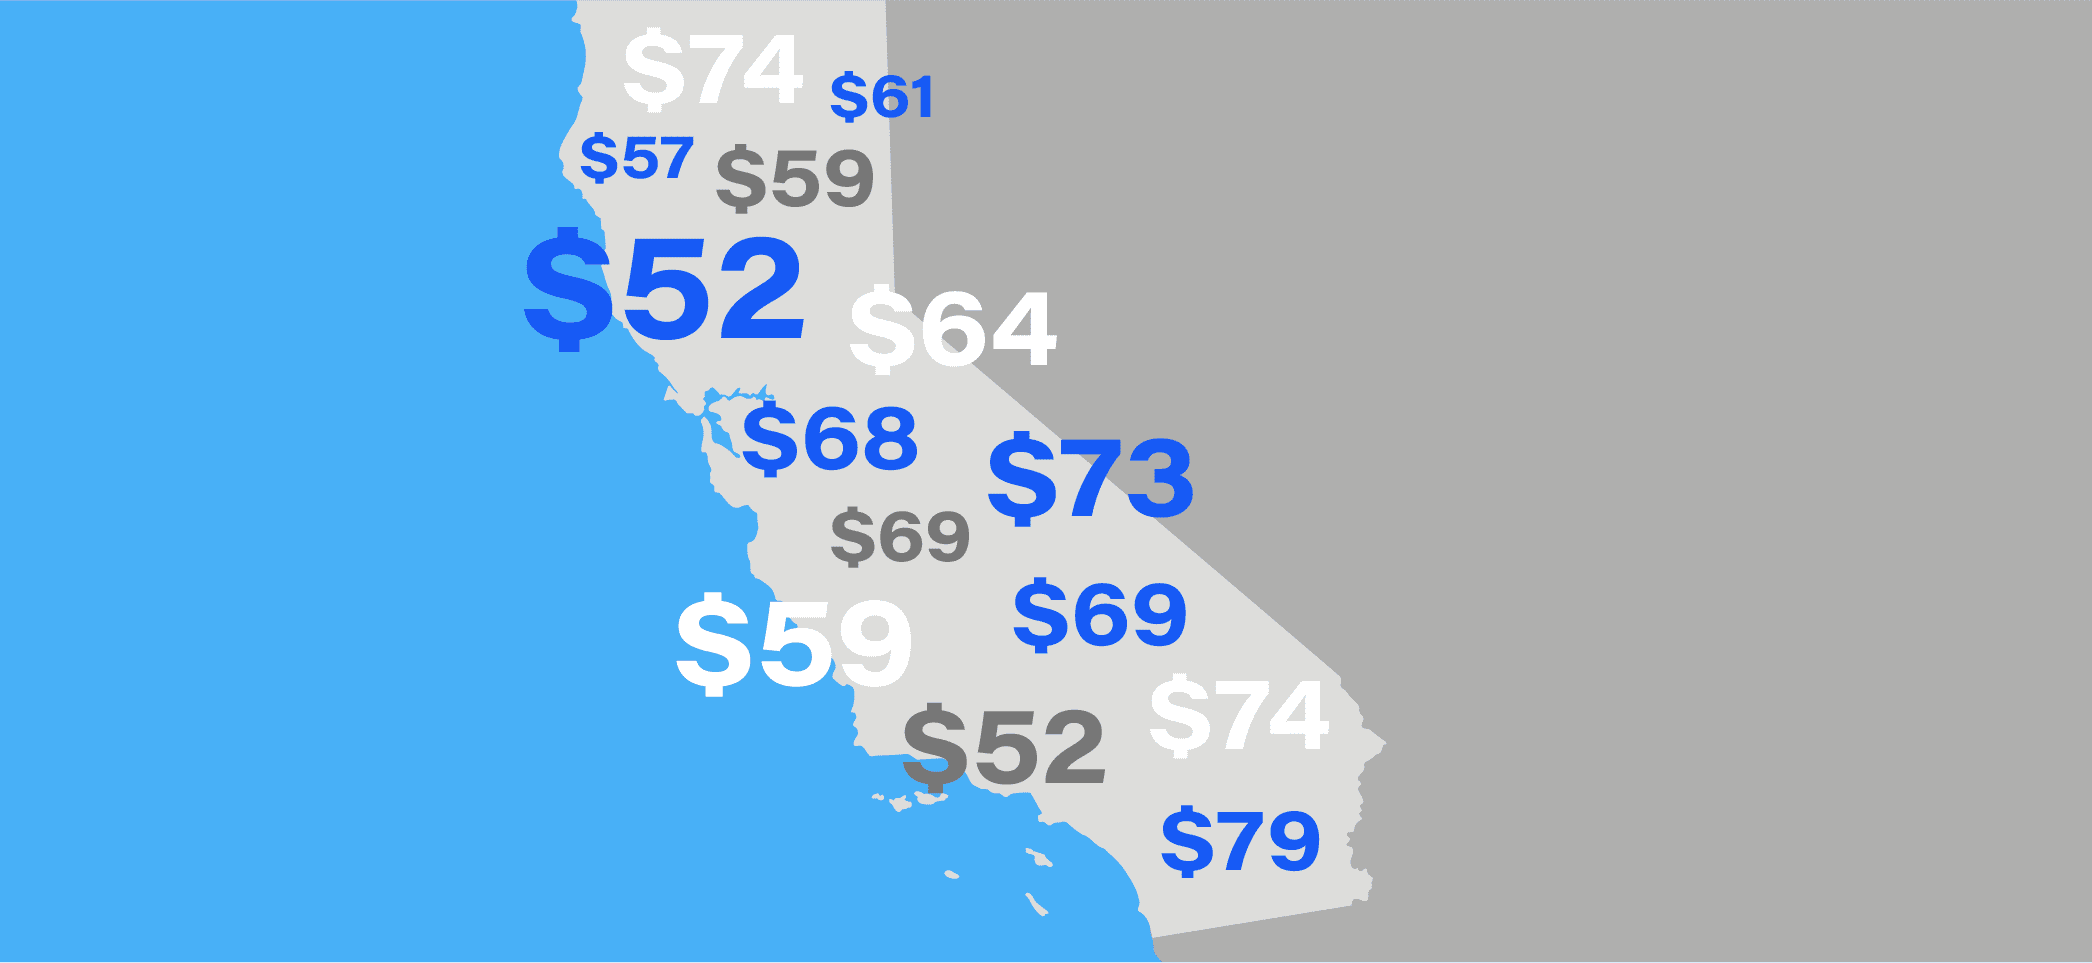 How Much Is the Administrative Fee for Traffic School in California